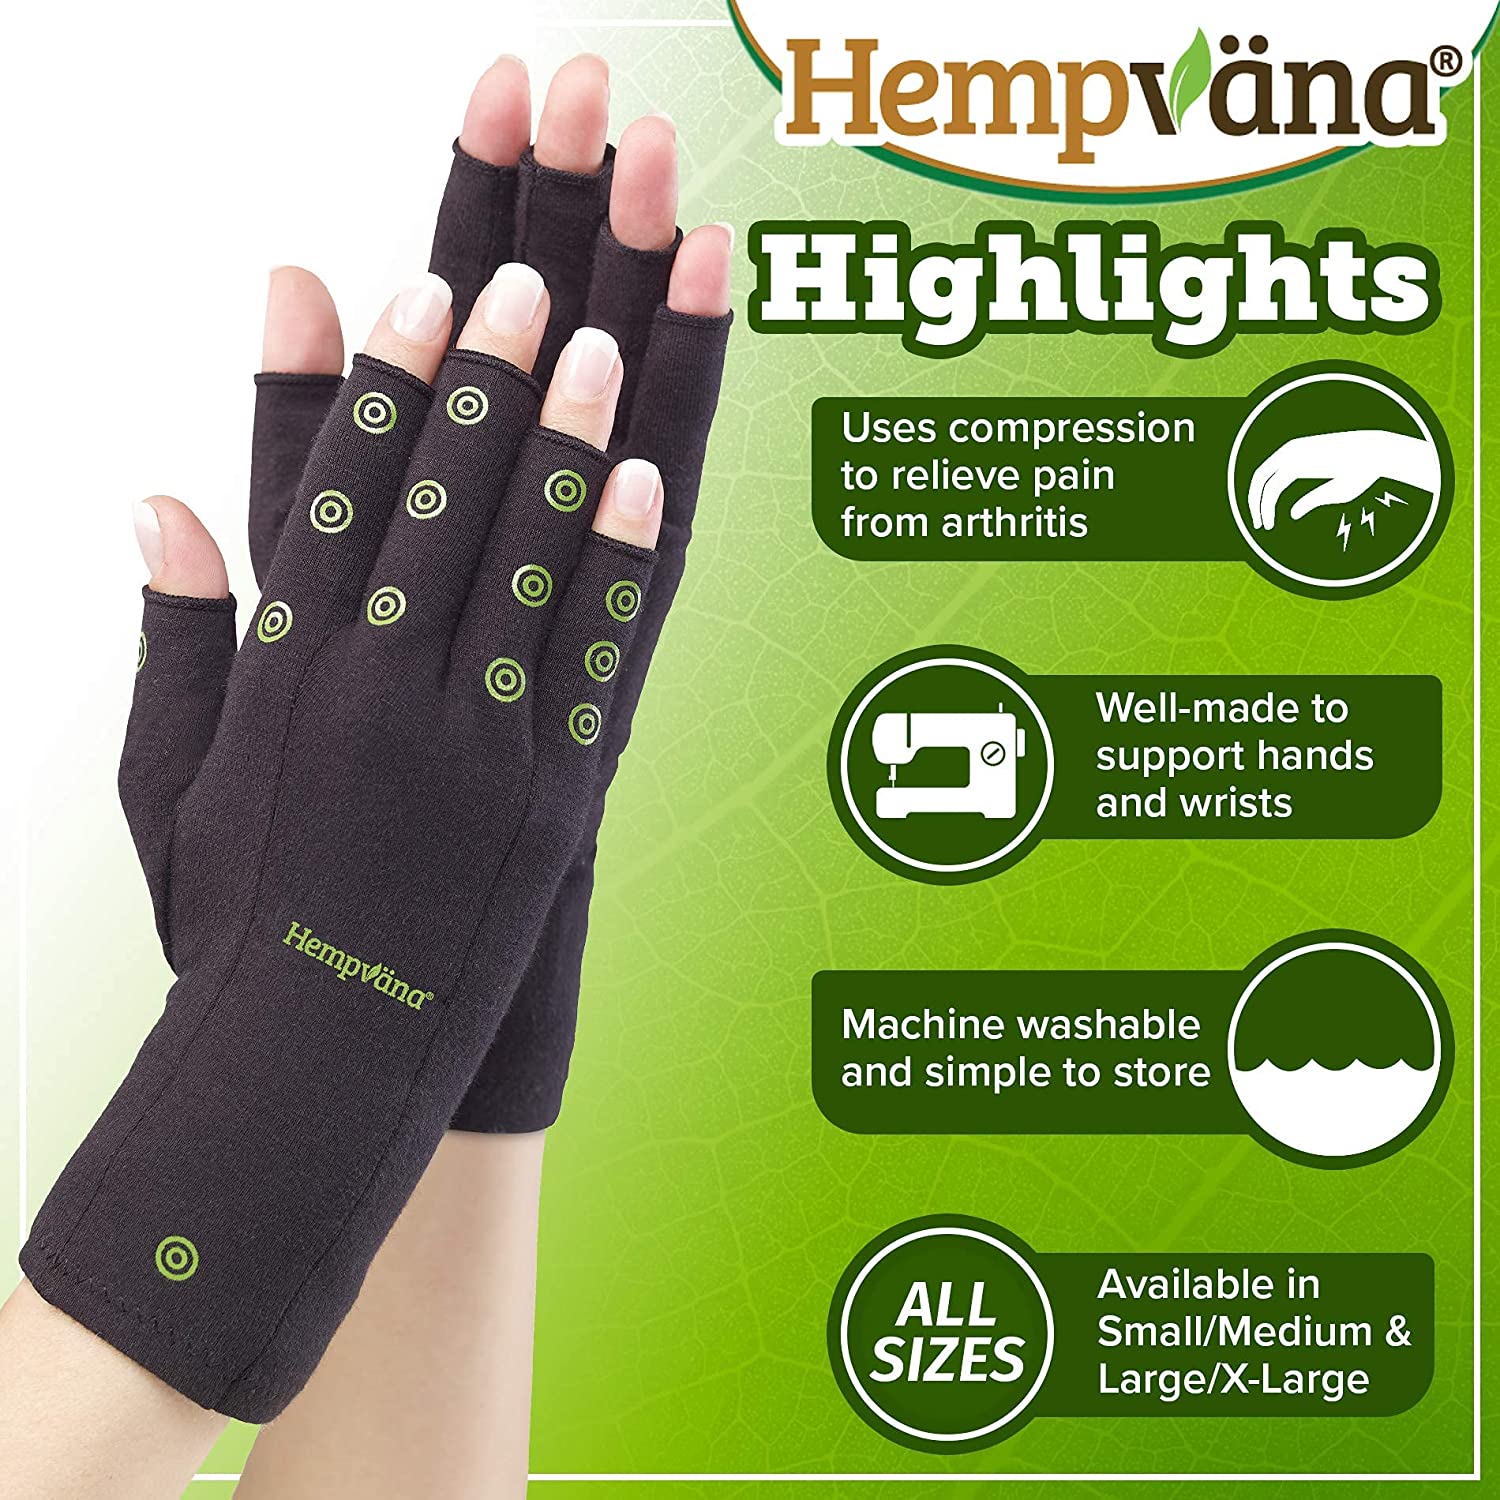 Hempvana Arthritis Compression Gloves Highlights: Uses compression, supports hands and wrists, machine washable, all sizes